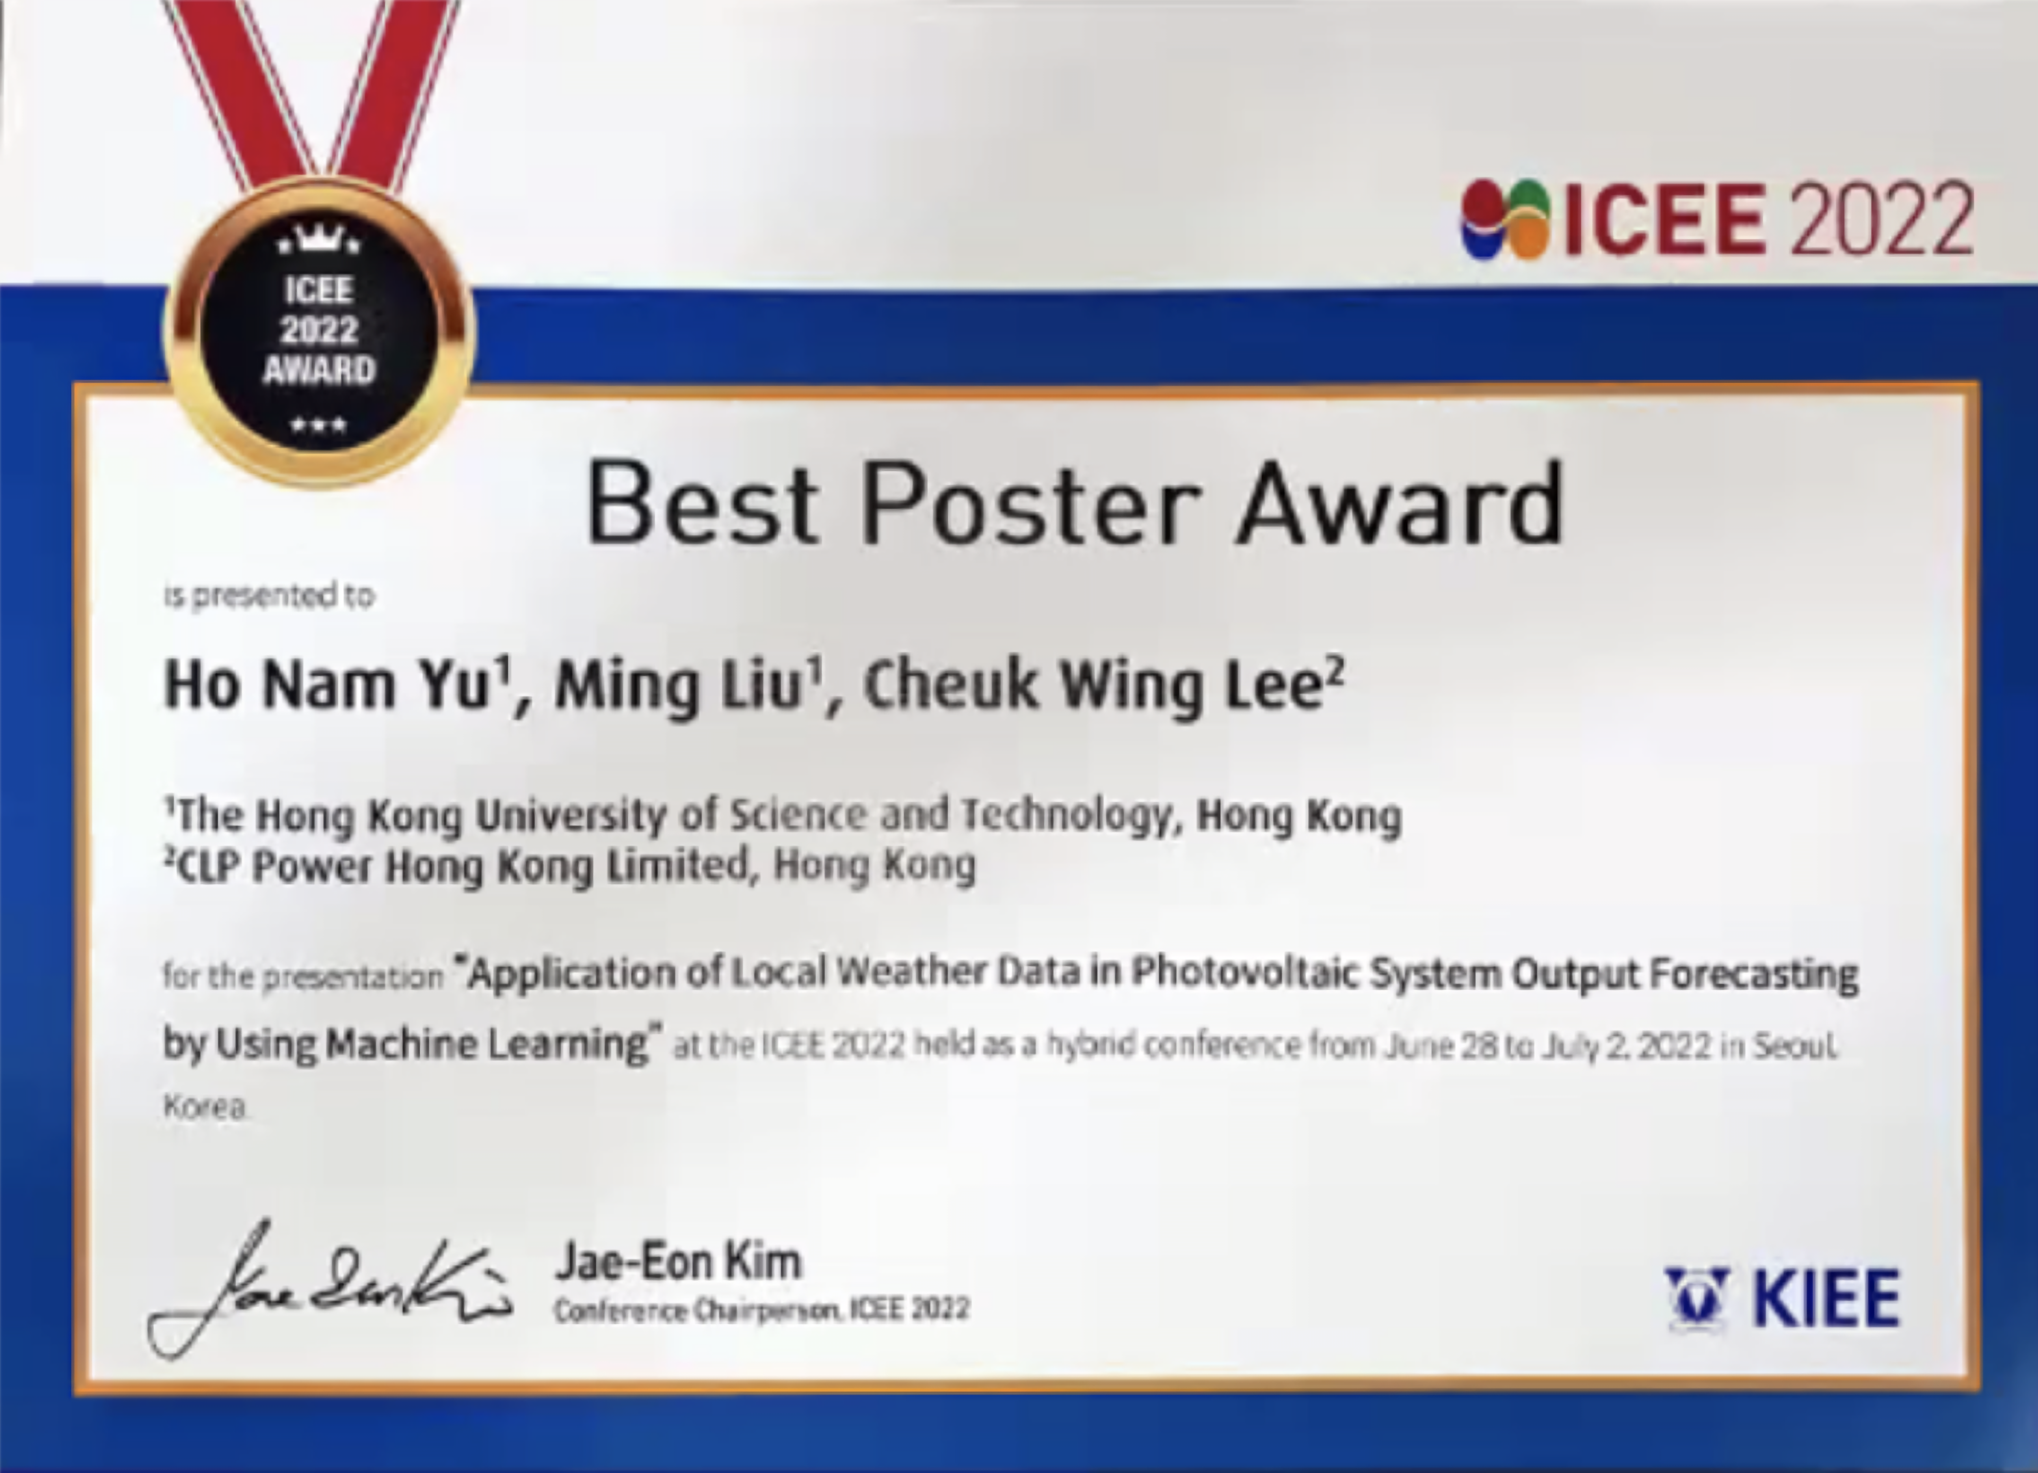 Our Paper got the Best Poster Paper Award at ICEE 2022